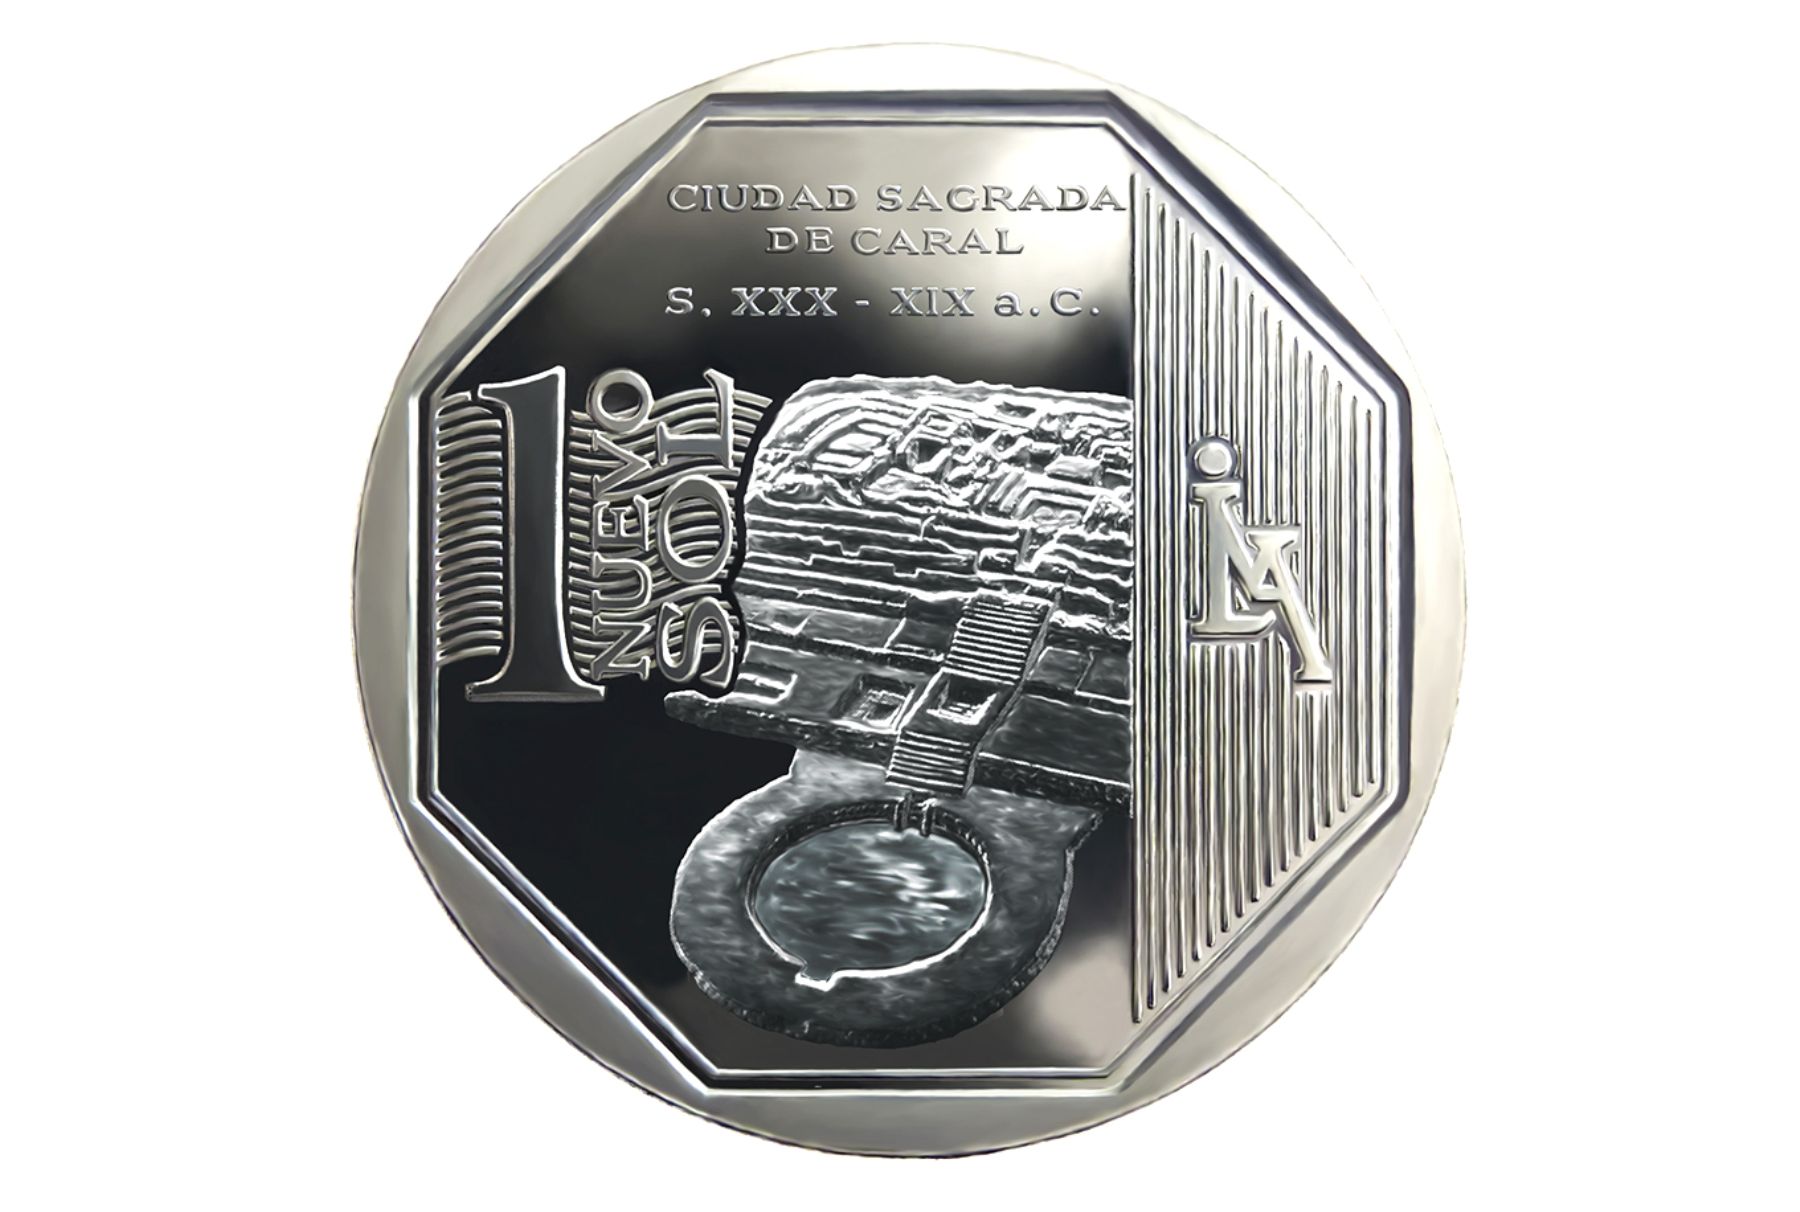 New 1 sol coin